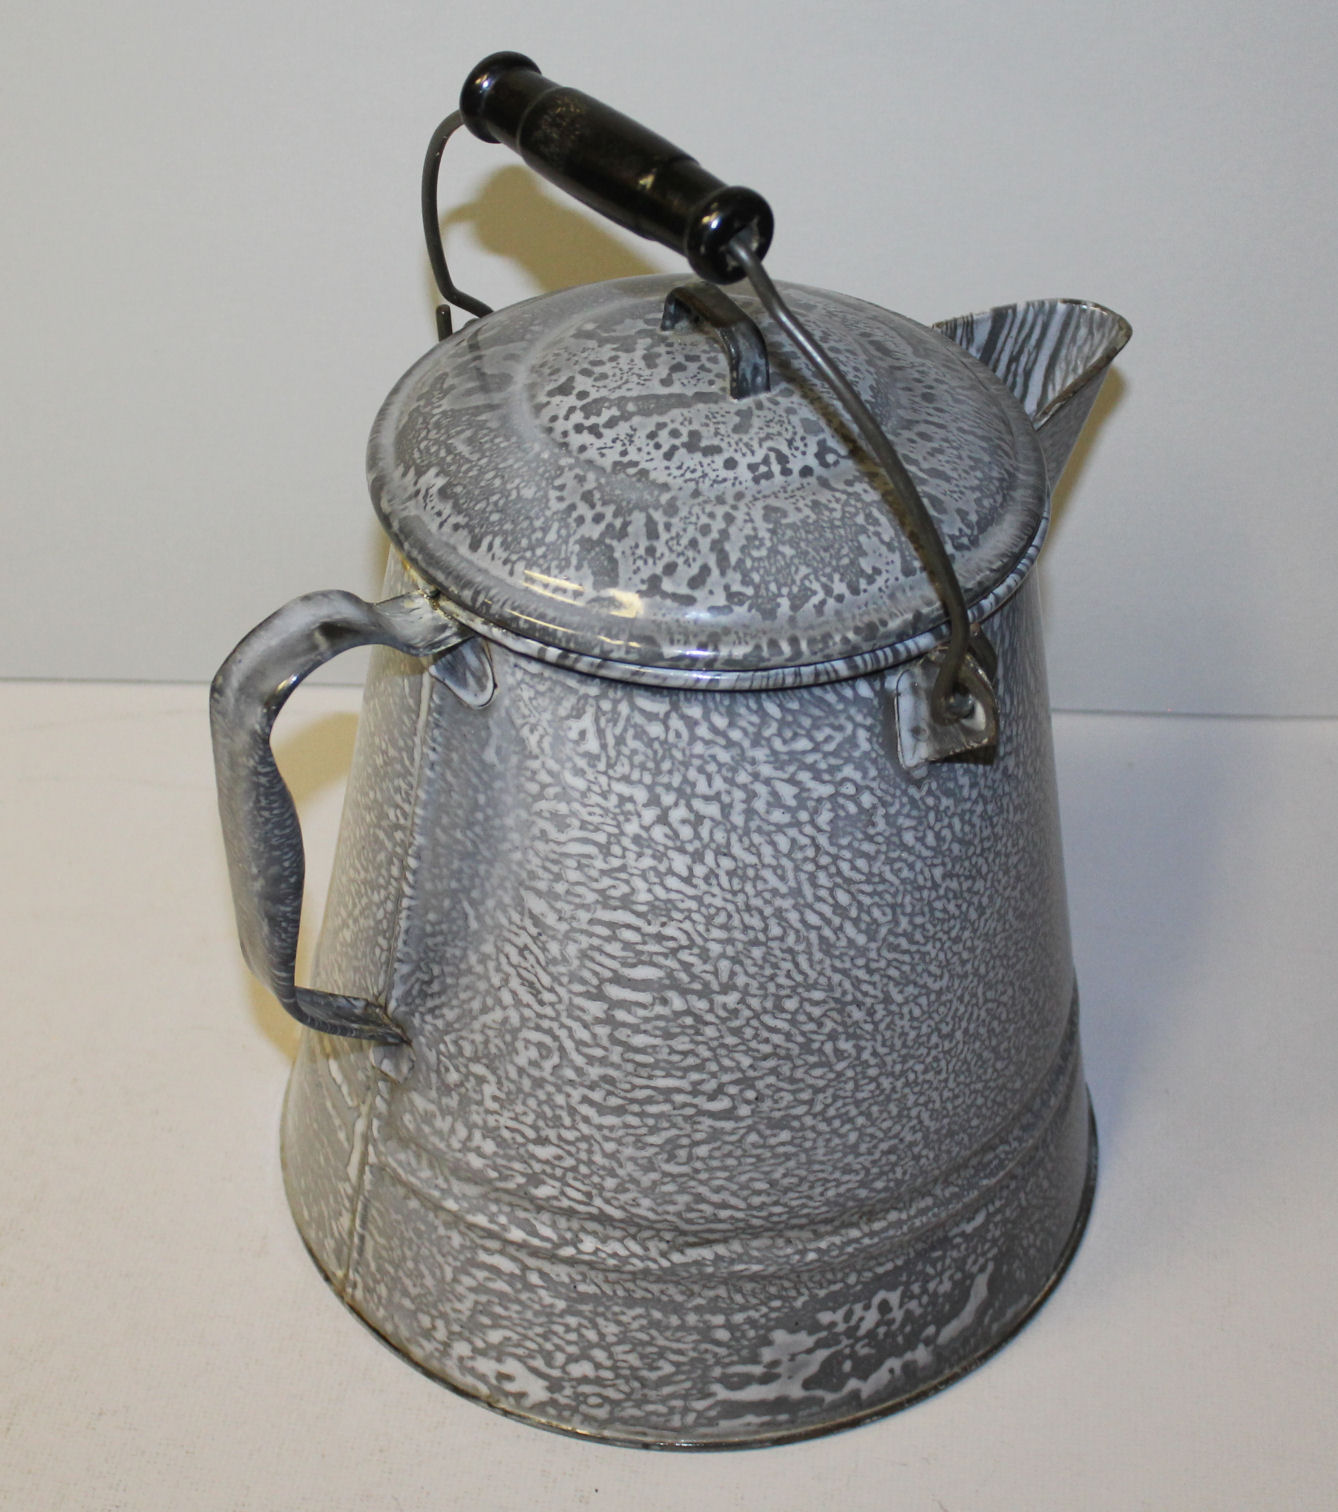 Lg. Brown Enamelware Cowboy Coffee Pot with White String Squiggles  1940's/50's